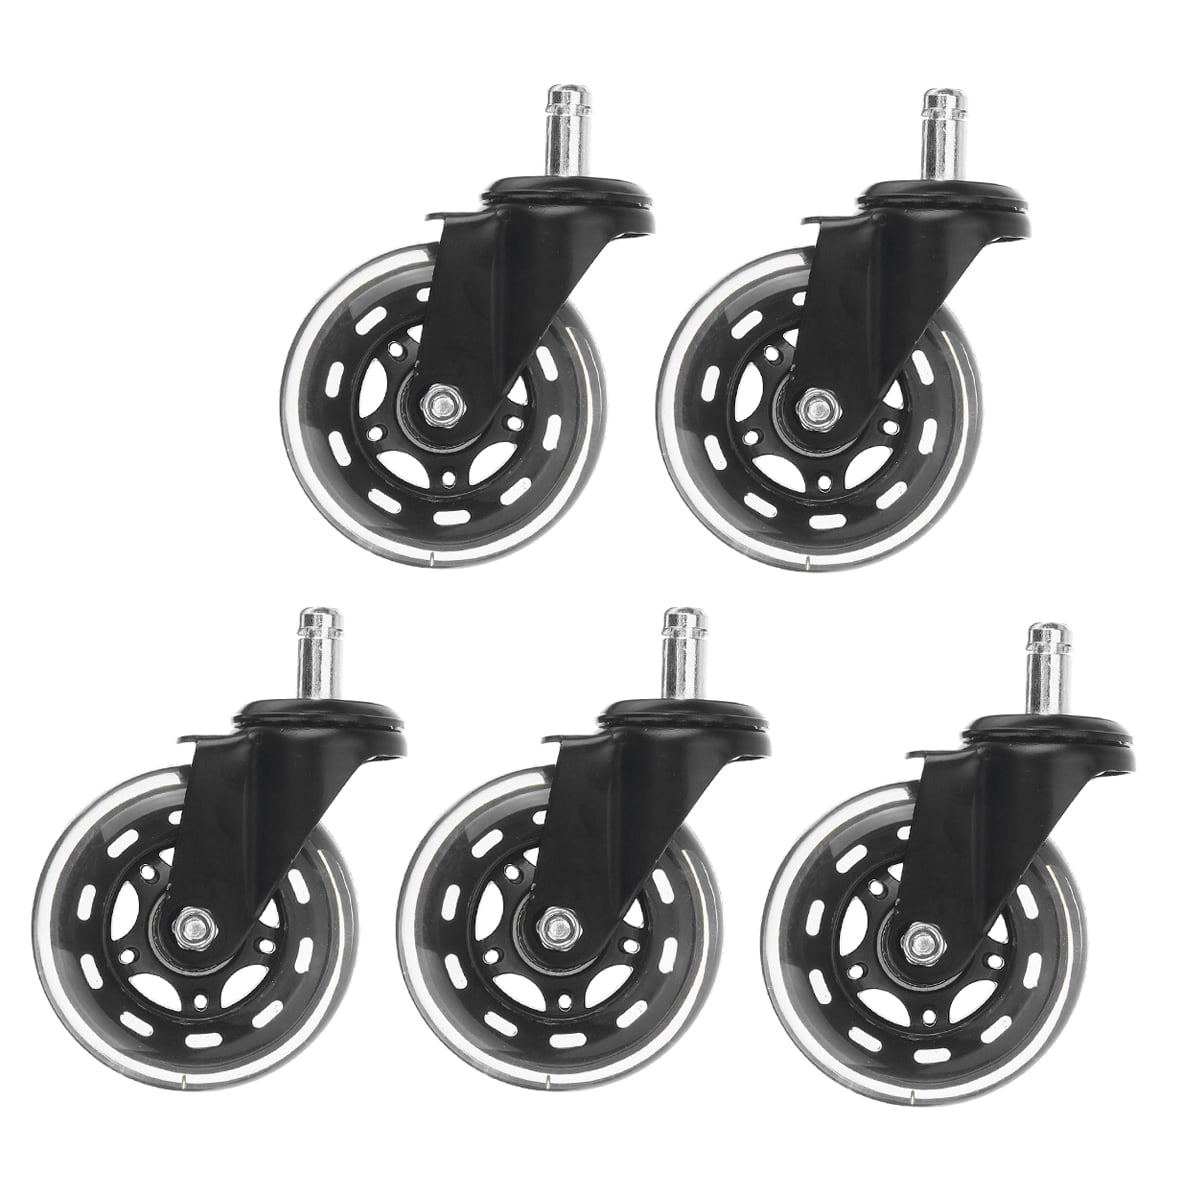 Office Chair Caster Wheels-Set of 5 Heavy Duty 3 Office Chair Replacement Wheels-Smooth&Safe for Hardwood,Tile Floors-Universal Fit for Aeron,Mid-Back Office Chair Half Brake, 2Brake+3No Brake 